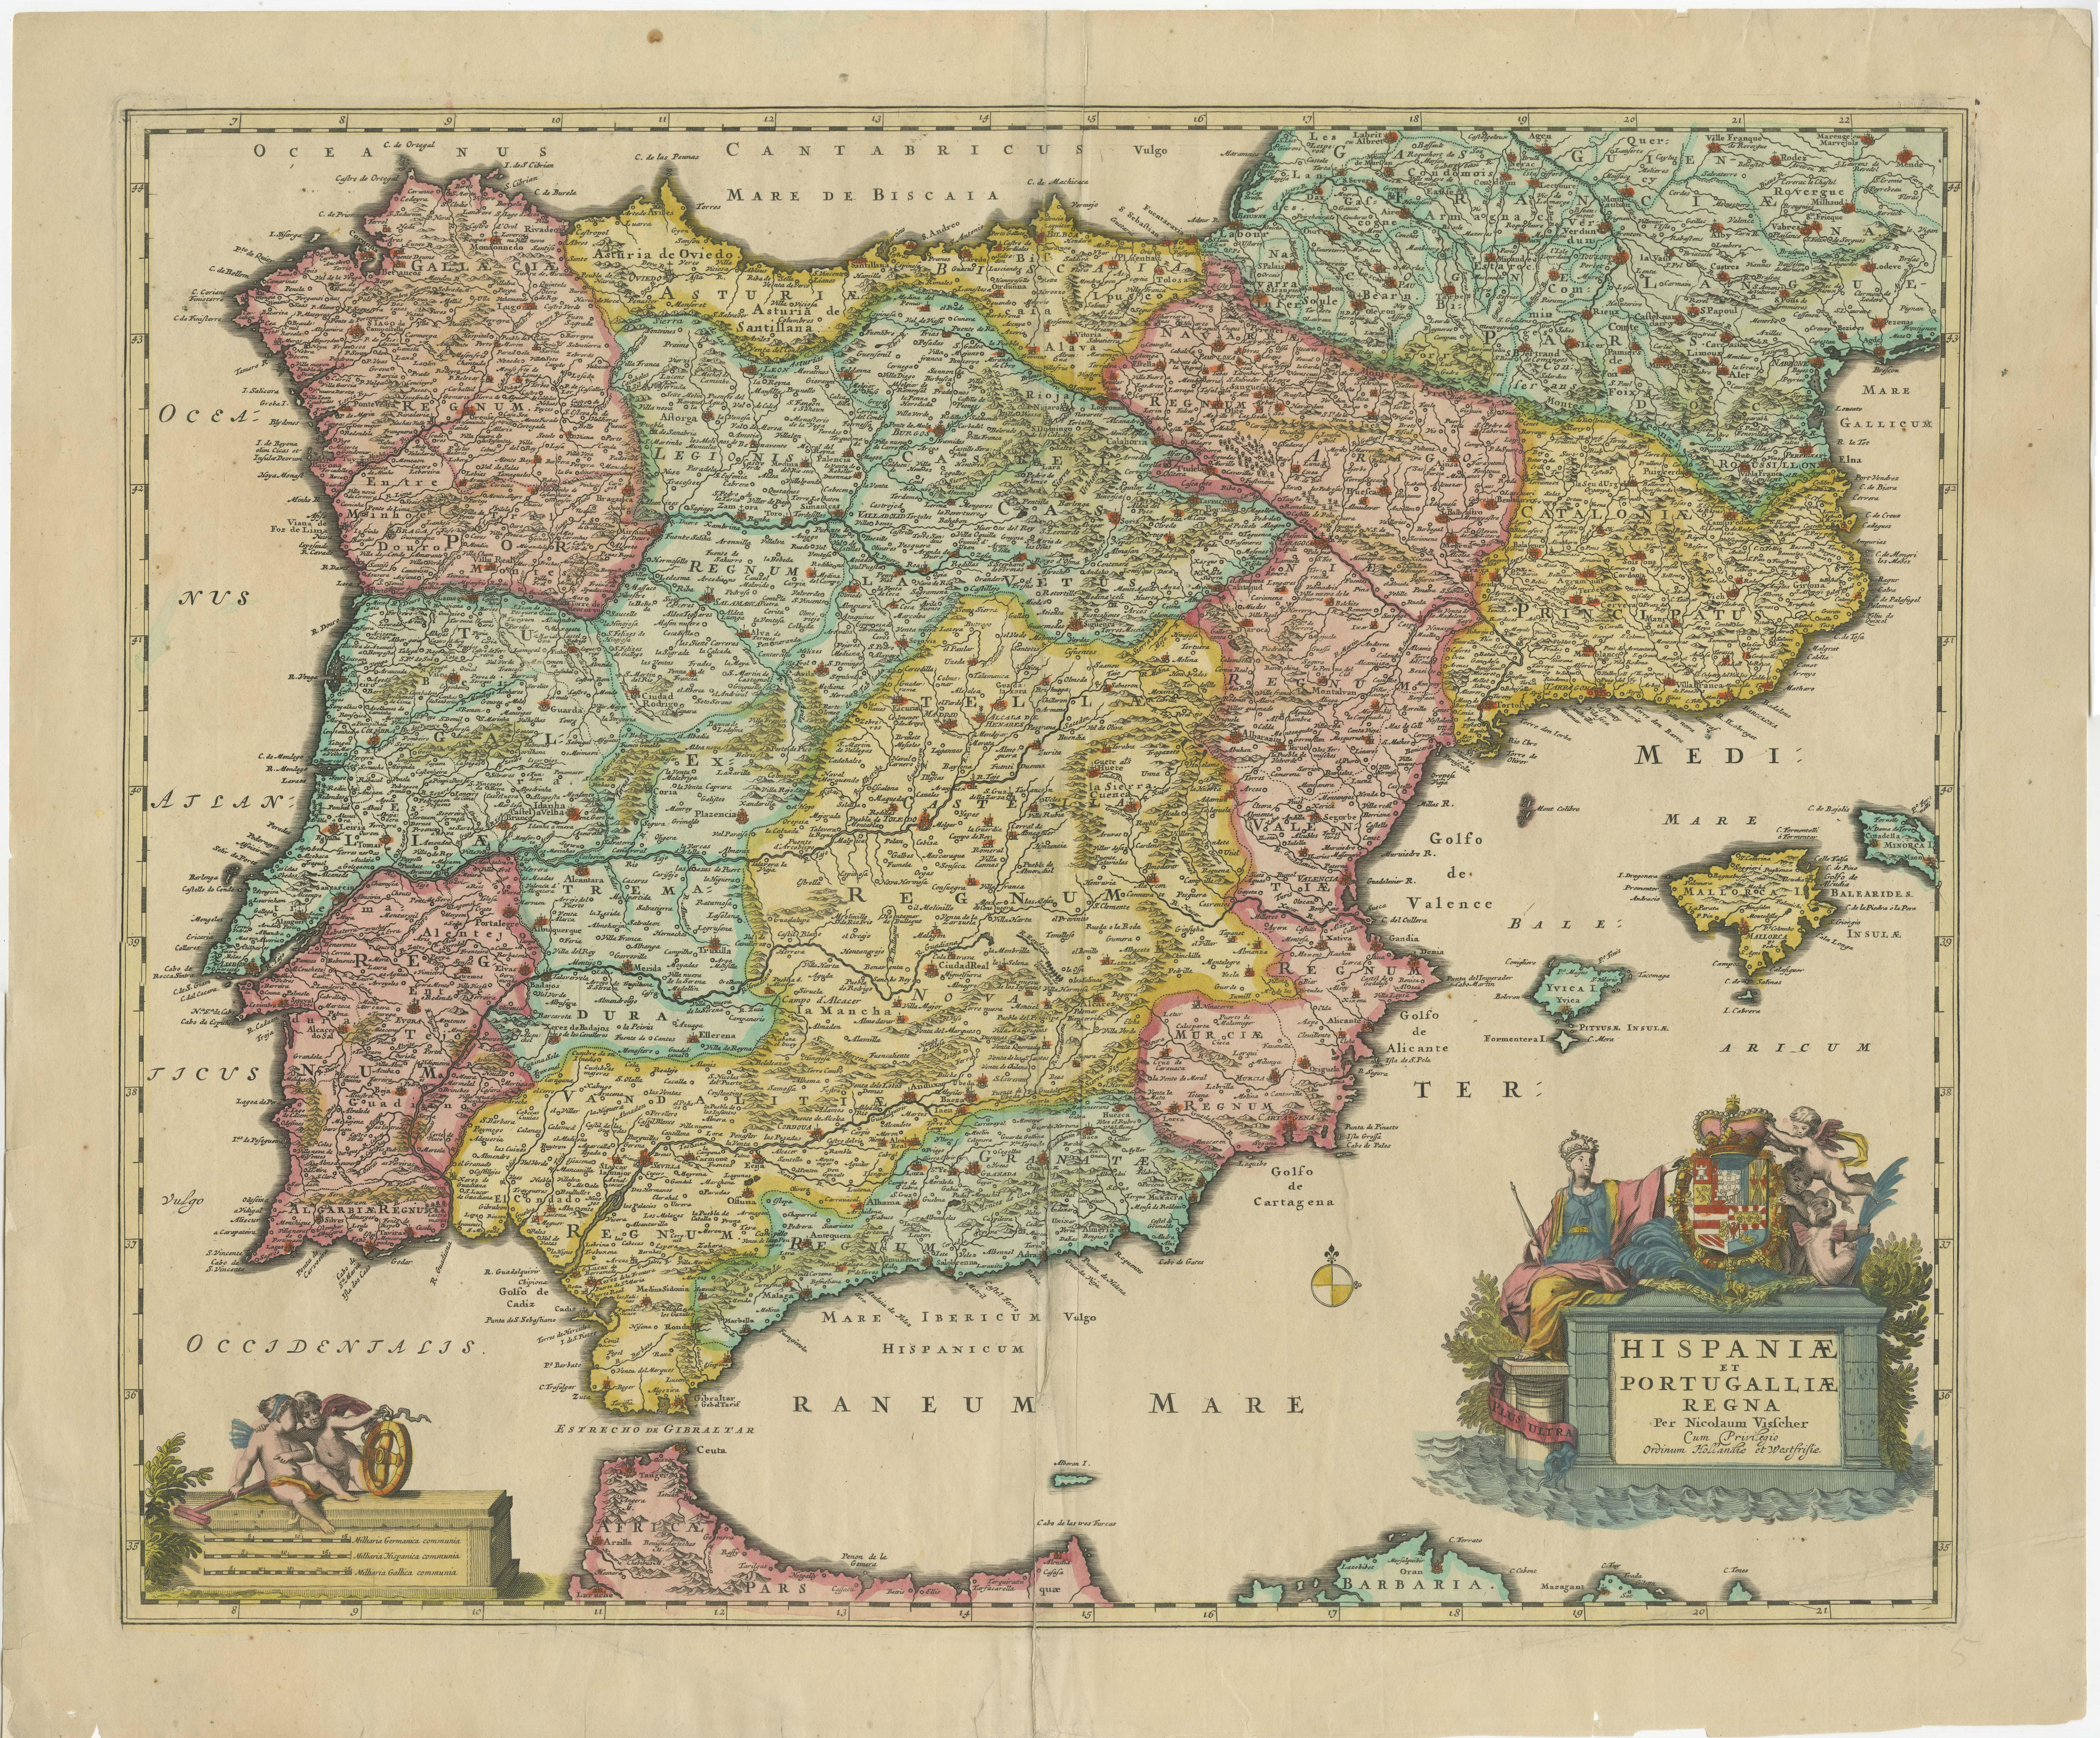 Antique map titled 'Hispaniae et Portugalliae Regna'. Original old map of the Iberian peninsula showing Spain, Portugal and the Balearic Islands. Two beautiful cartouches with several putti and coat of arms. Published by N. Visscher, circa 1680.